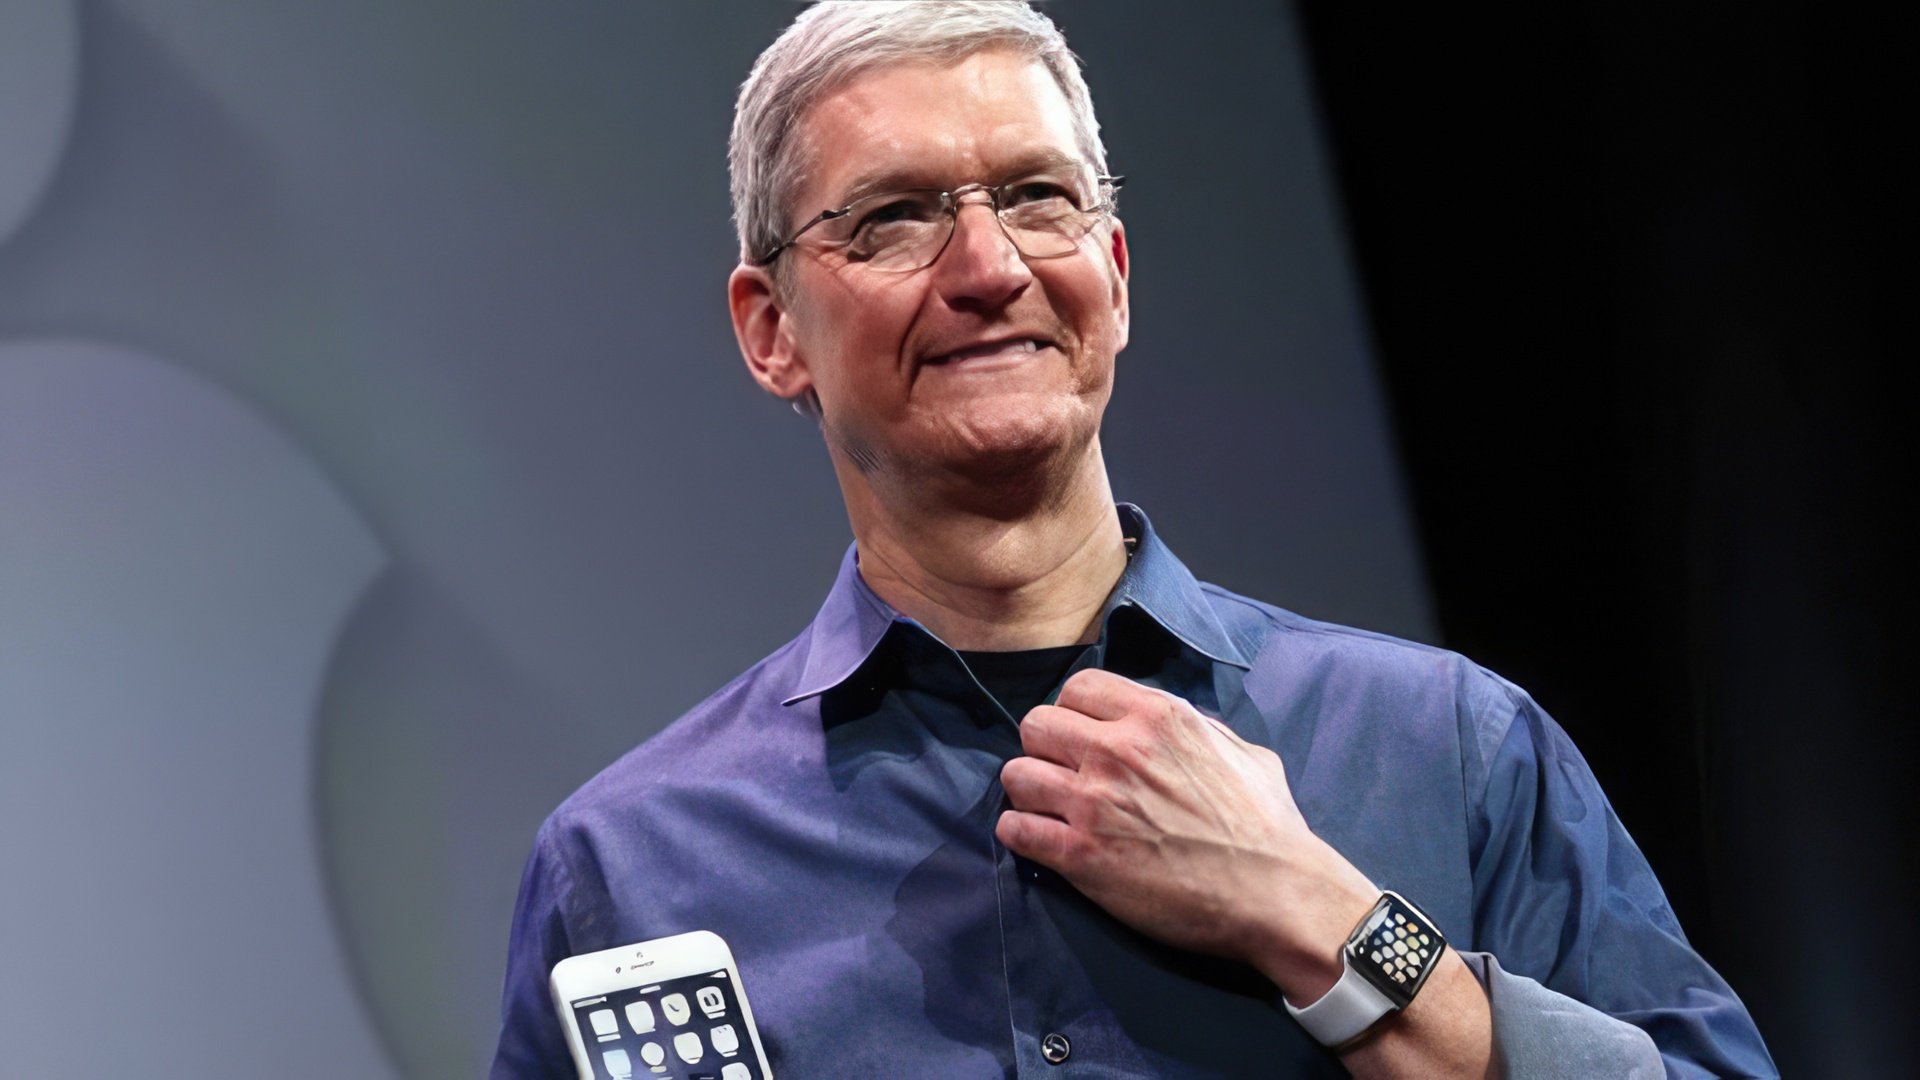 By 2007, Tim Cook grew to the position of chief operating officer of Apple